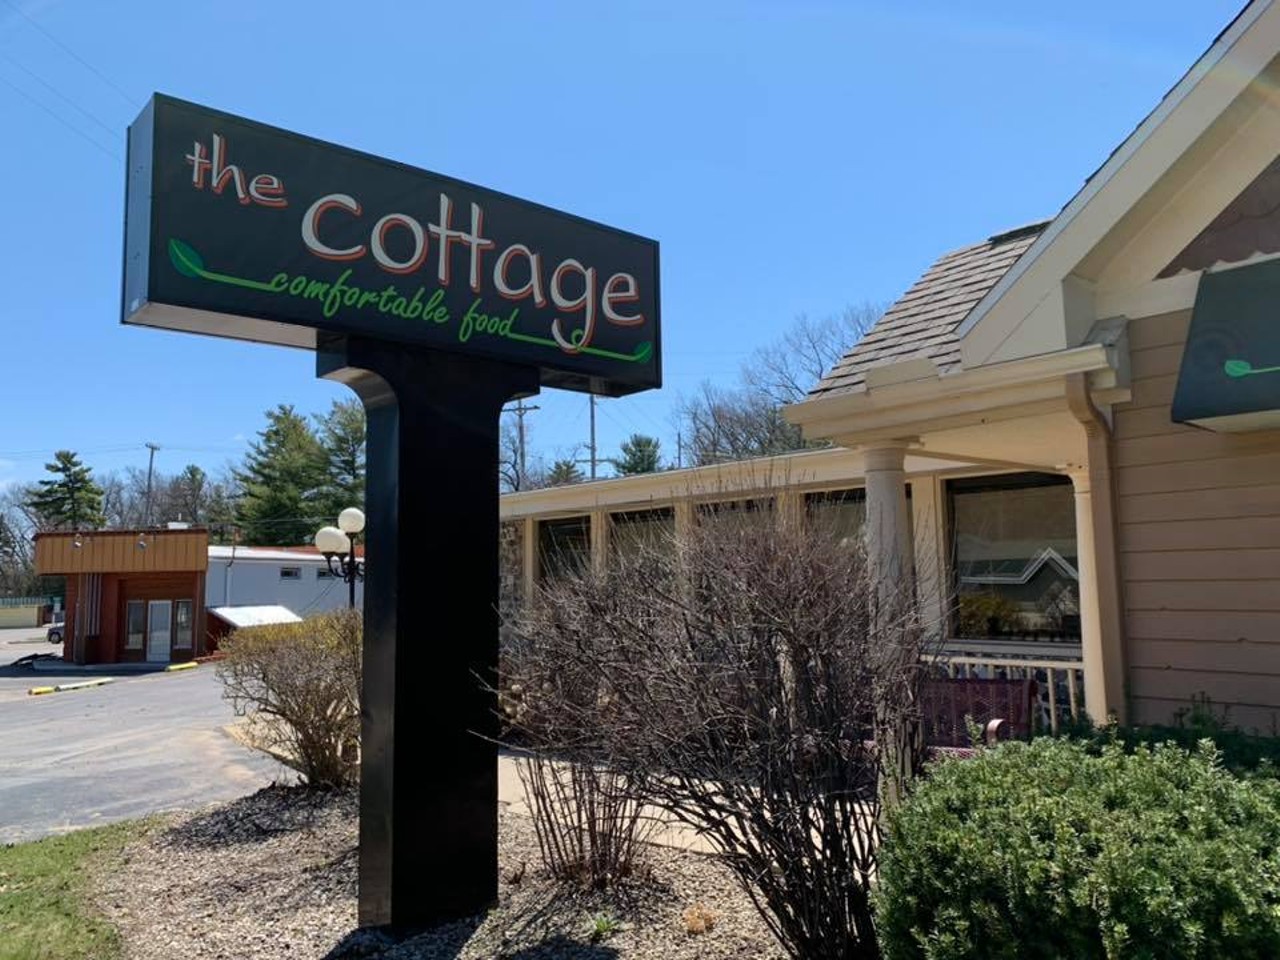 The cottage
472 Munson Ave., Traverse City; 231-947-9261; cottagecafetc.com
Come to tour the coastal city, then unwind in this laid-back cafe, which is so lowkey its name doesn't even have capitalized letters. Start out with mozzarella sticks or onion rings, then enjoy an entree from its eclectic selection of sandwiches, or its all-day breakfast menu. This mom-and-pop-style cafe has all the comforts of home, without the nagging parents.
Photo via The cottage/Facebook